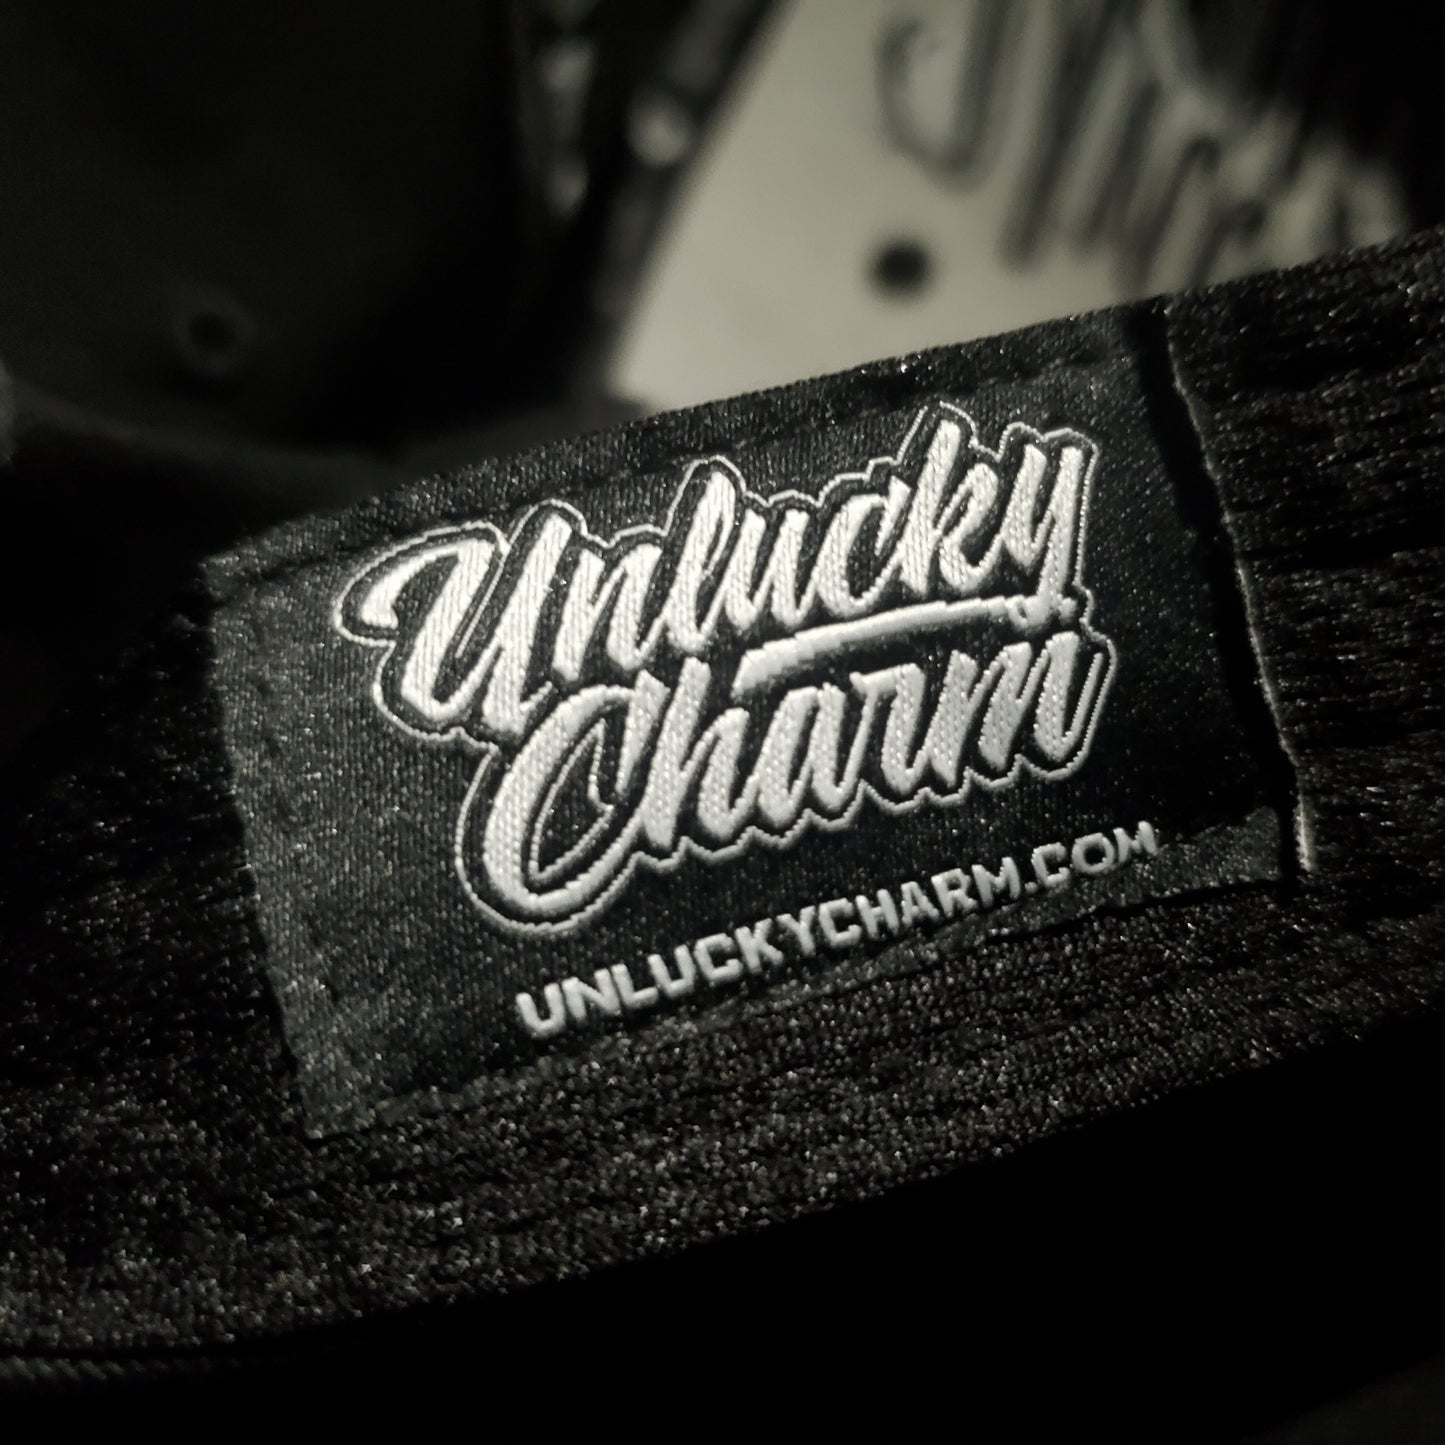 Your Lucky Hat (Black/White)